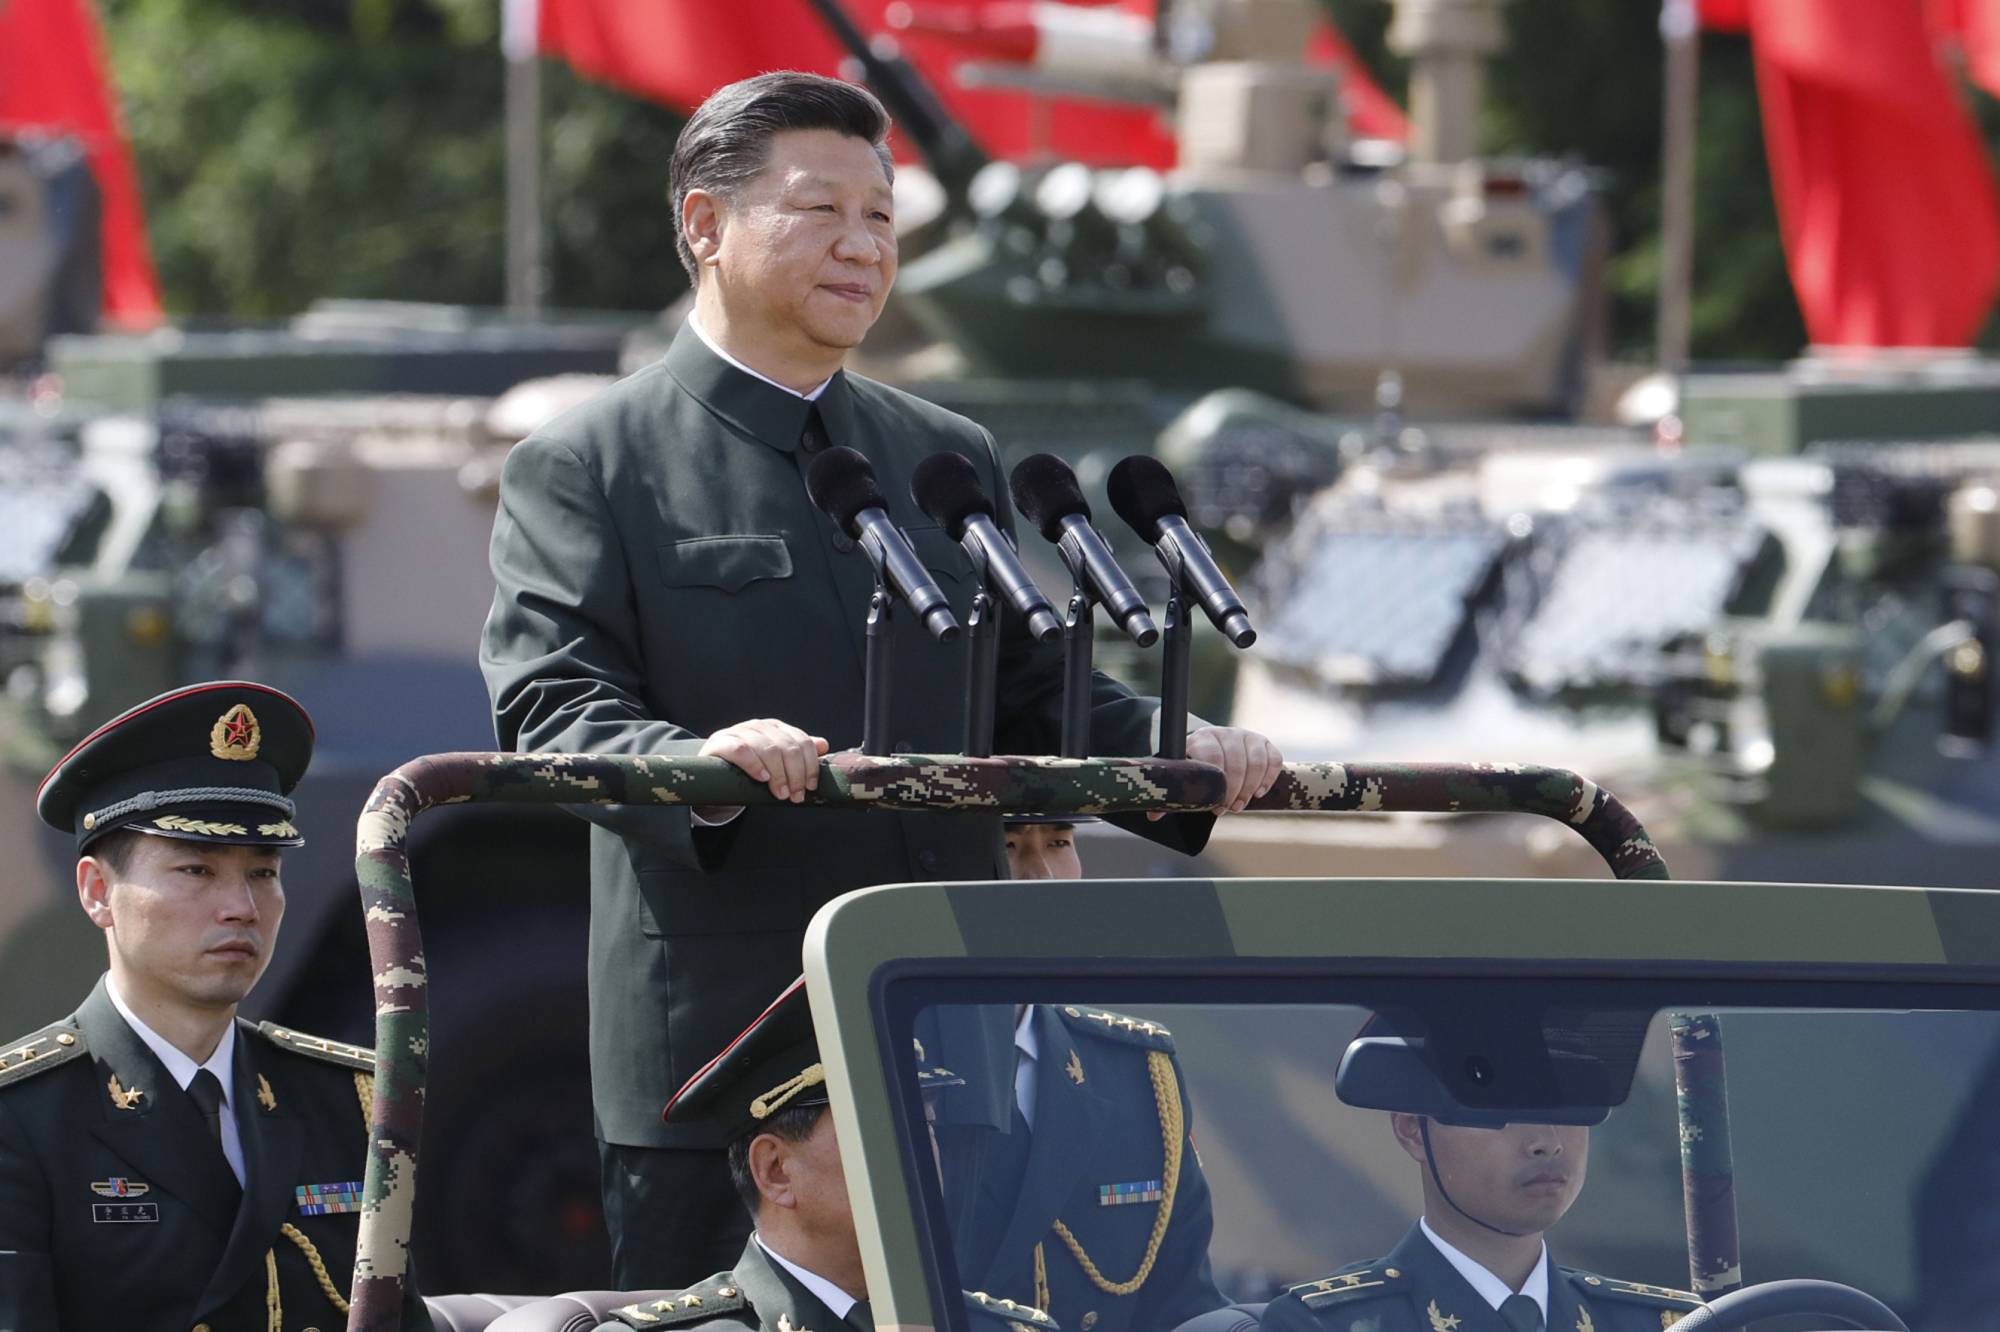 Chinese President Xi Jinping has vowed that by 2049, China would “become a global leader in terms of composite national strength and international influence.” | BLOOMBERG